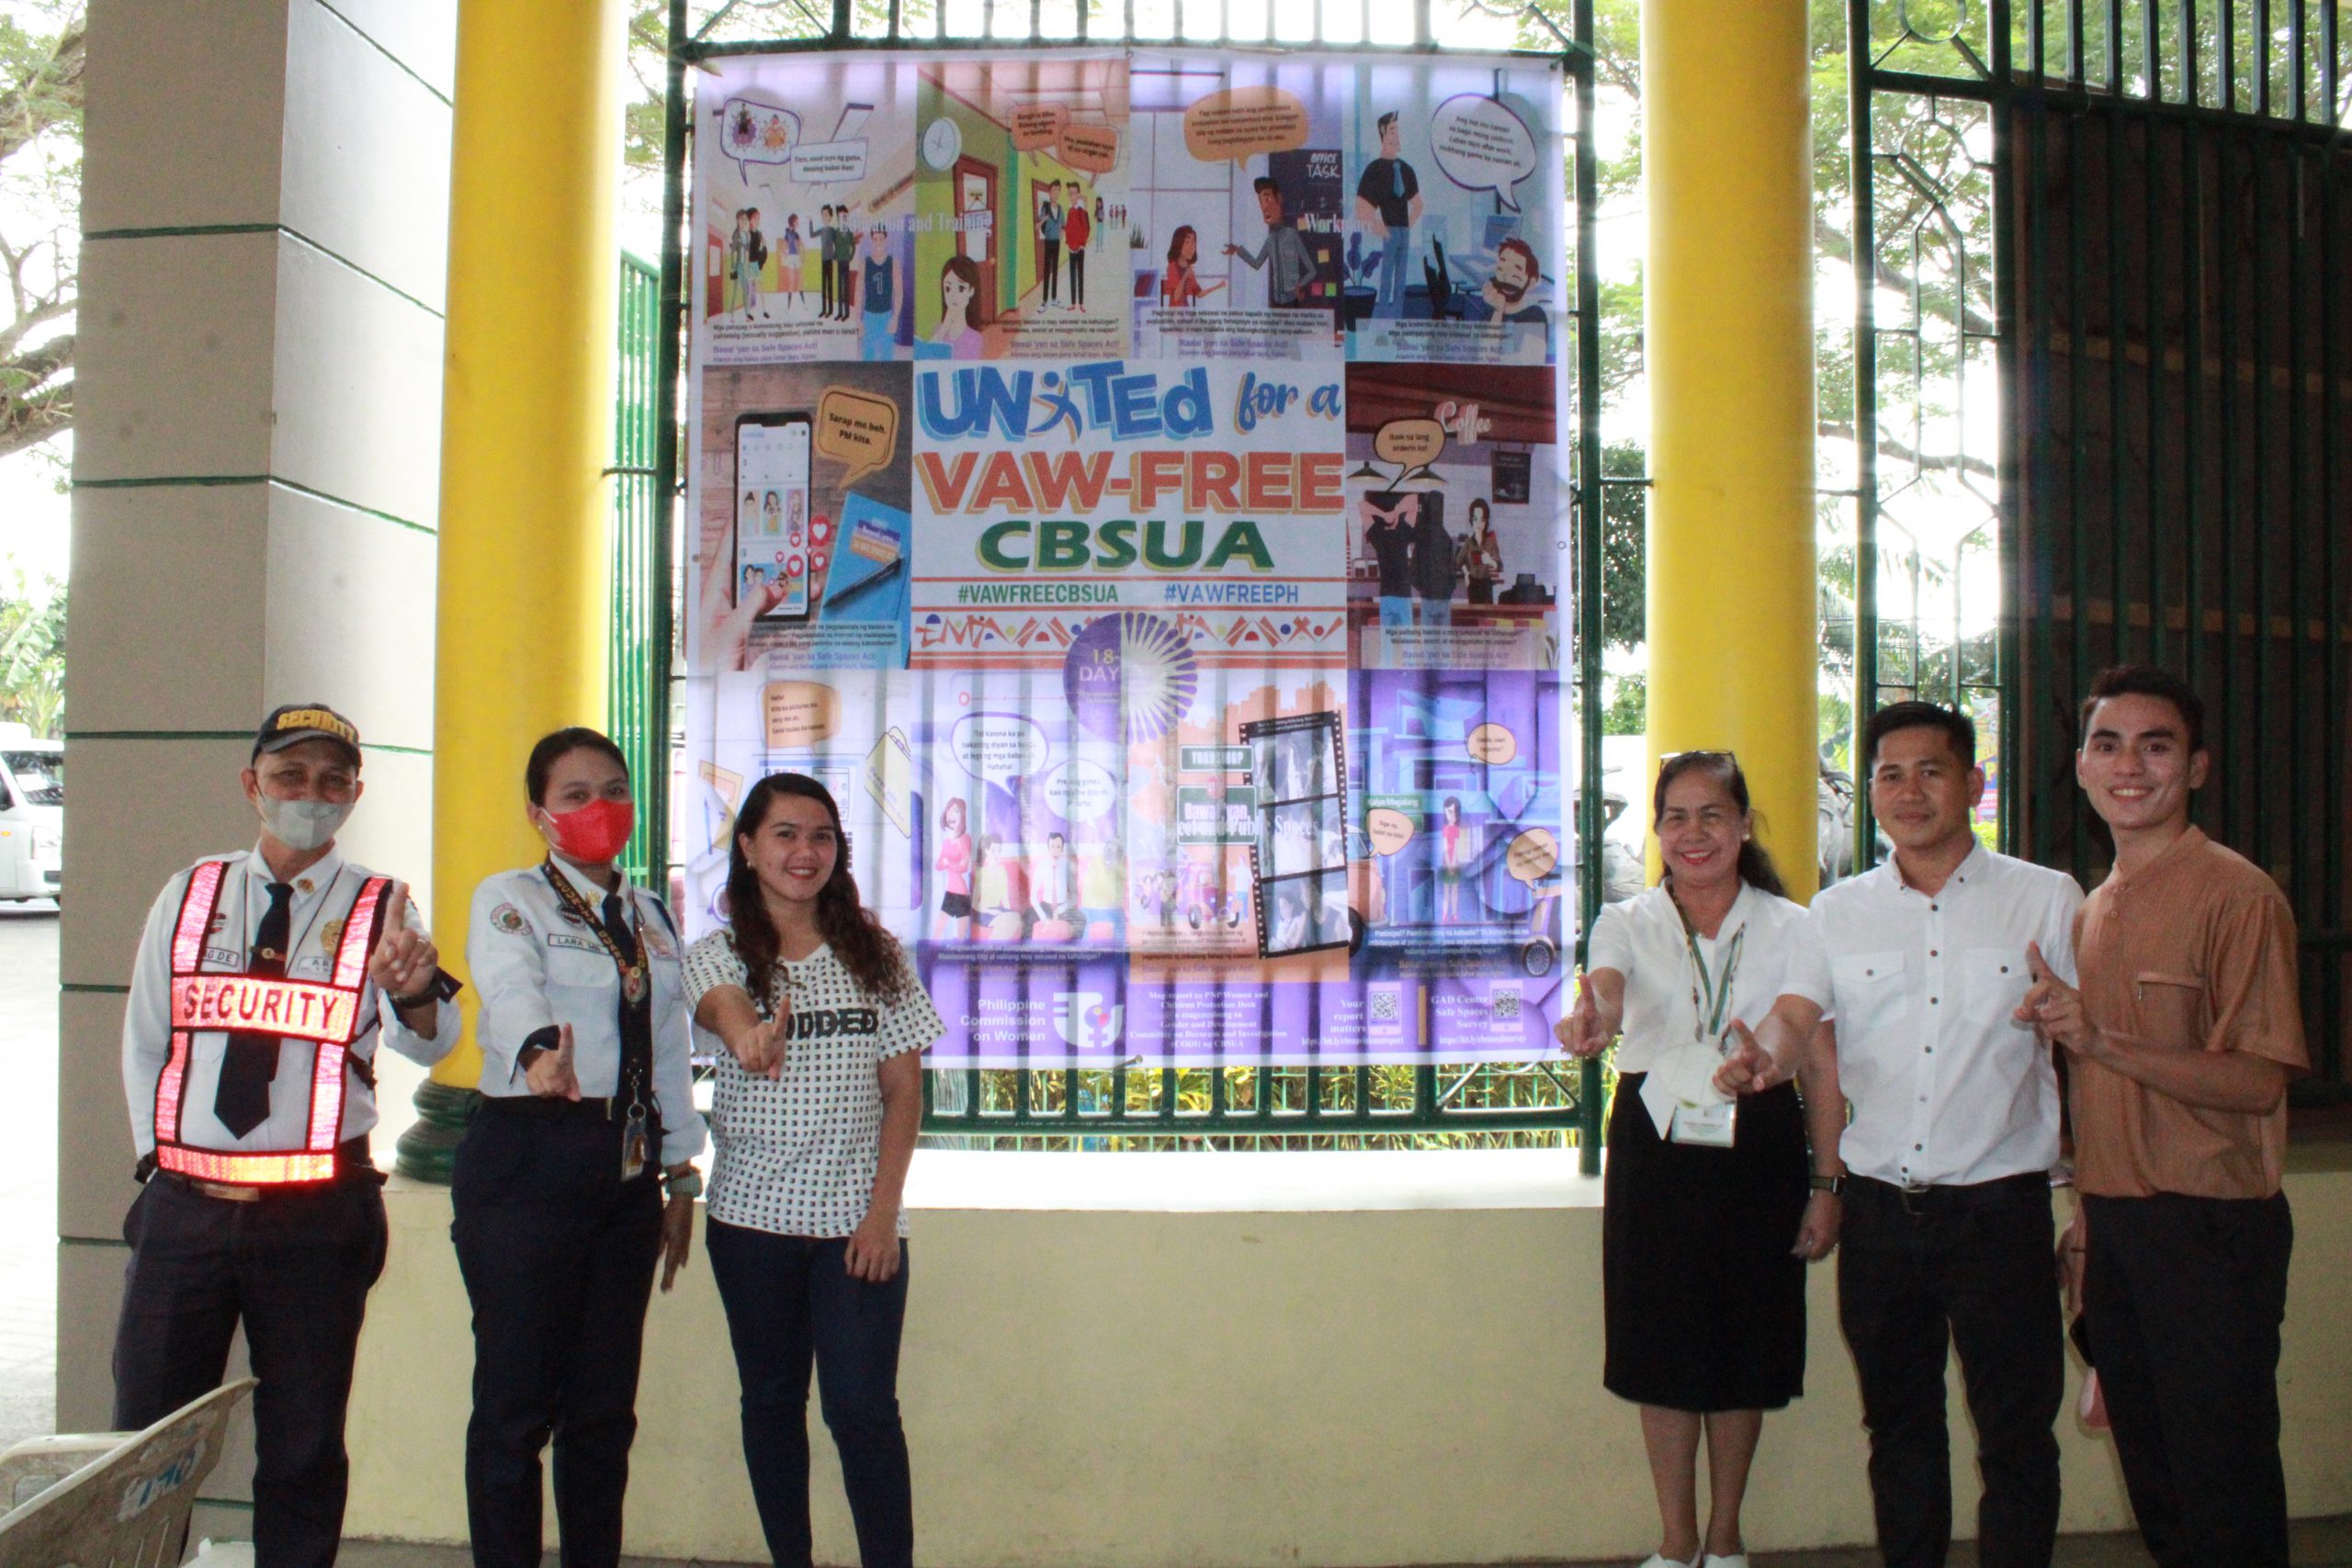 CBSUA LAUNCHES 18-DAY CAMPAIGN TO END VAW